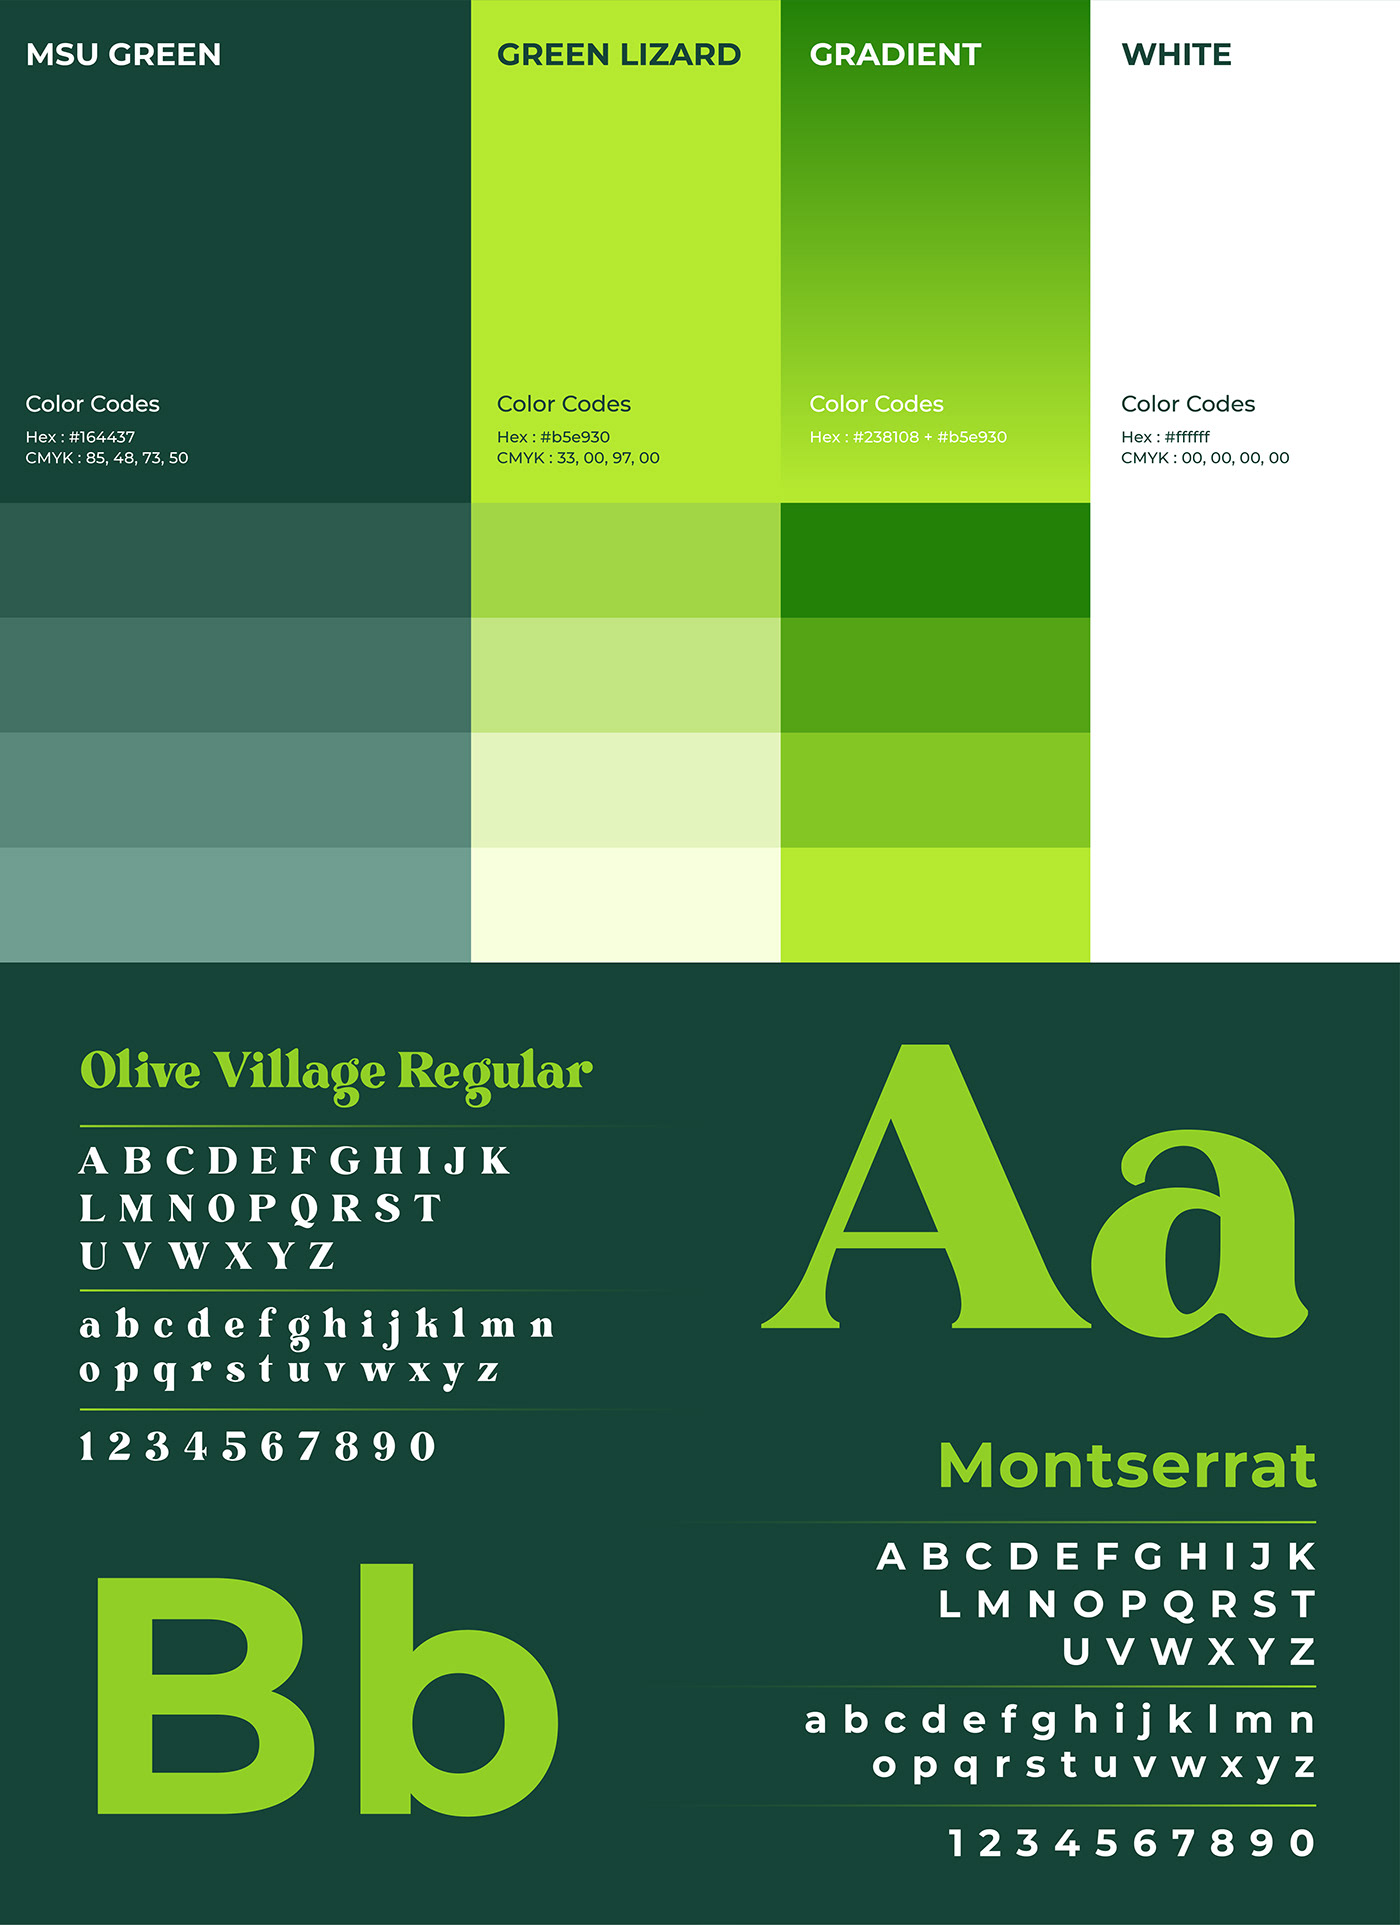 This image contains Kreidy's fresh brands color palette and typography.